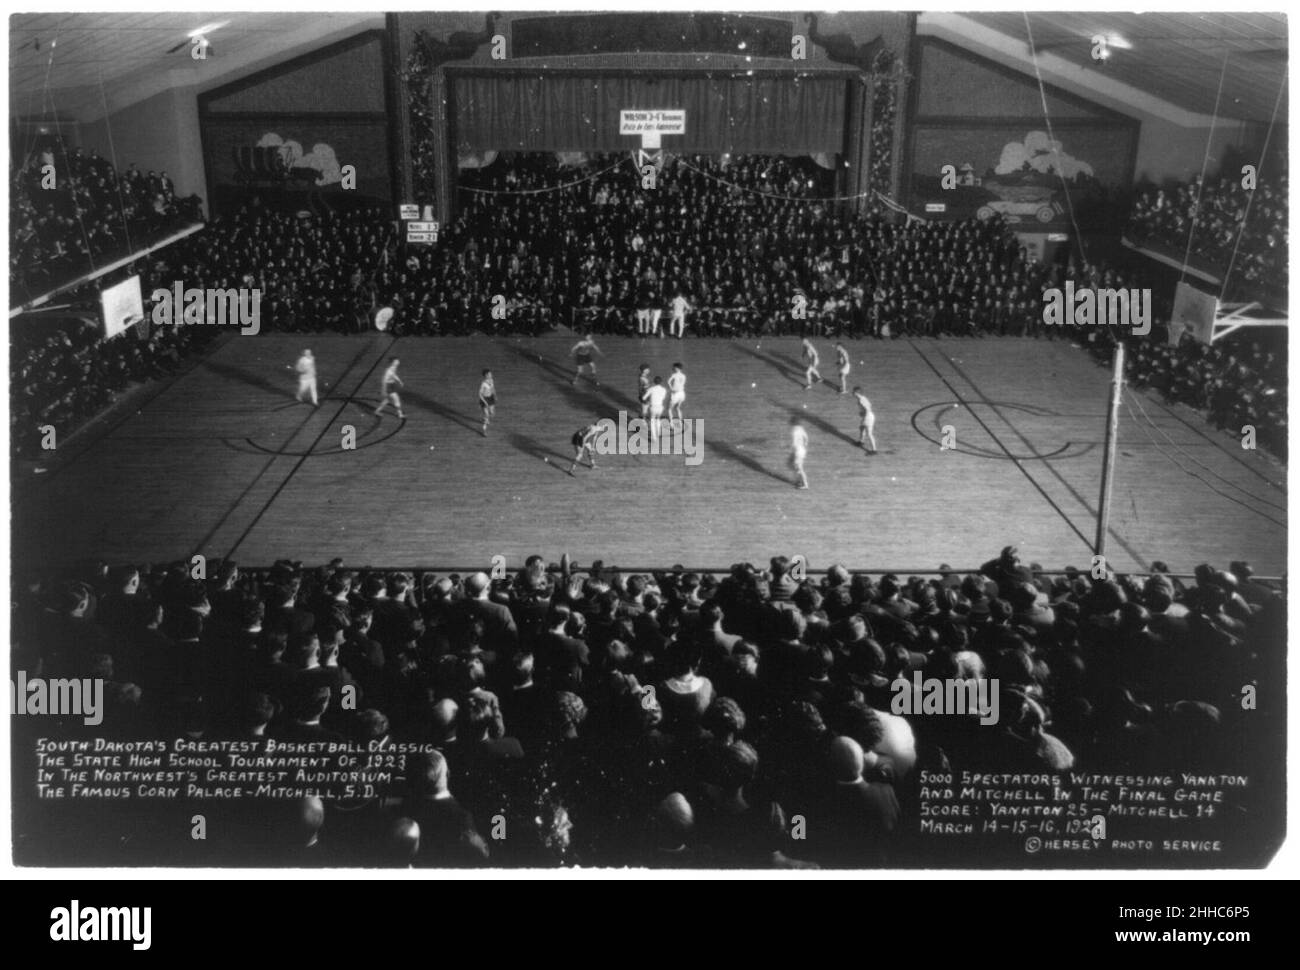 South Dakota's greatest basketball classic - the State High School Tournament of 1923, in the Northwest's greatest auditorium - the famous Corn Palace, Mitchell, S.D.-5000 spectators Stock Photo